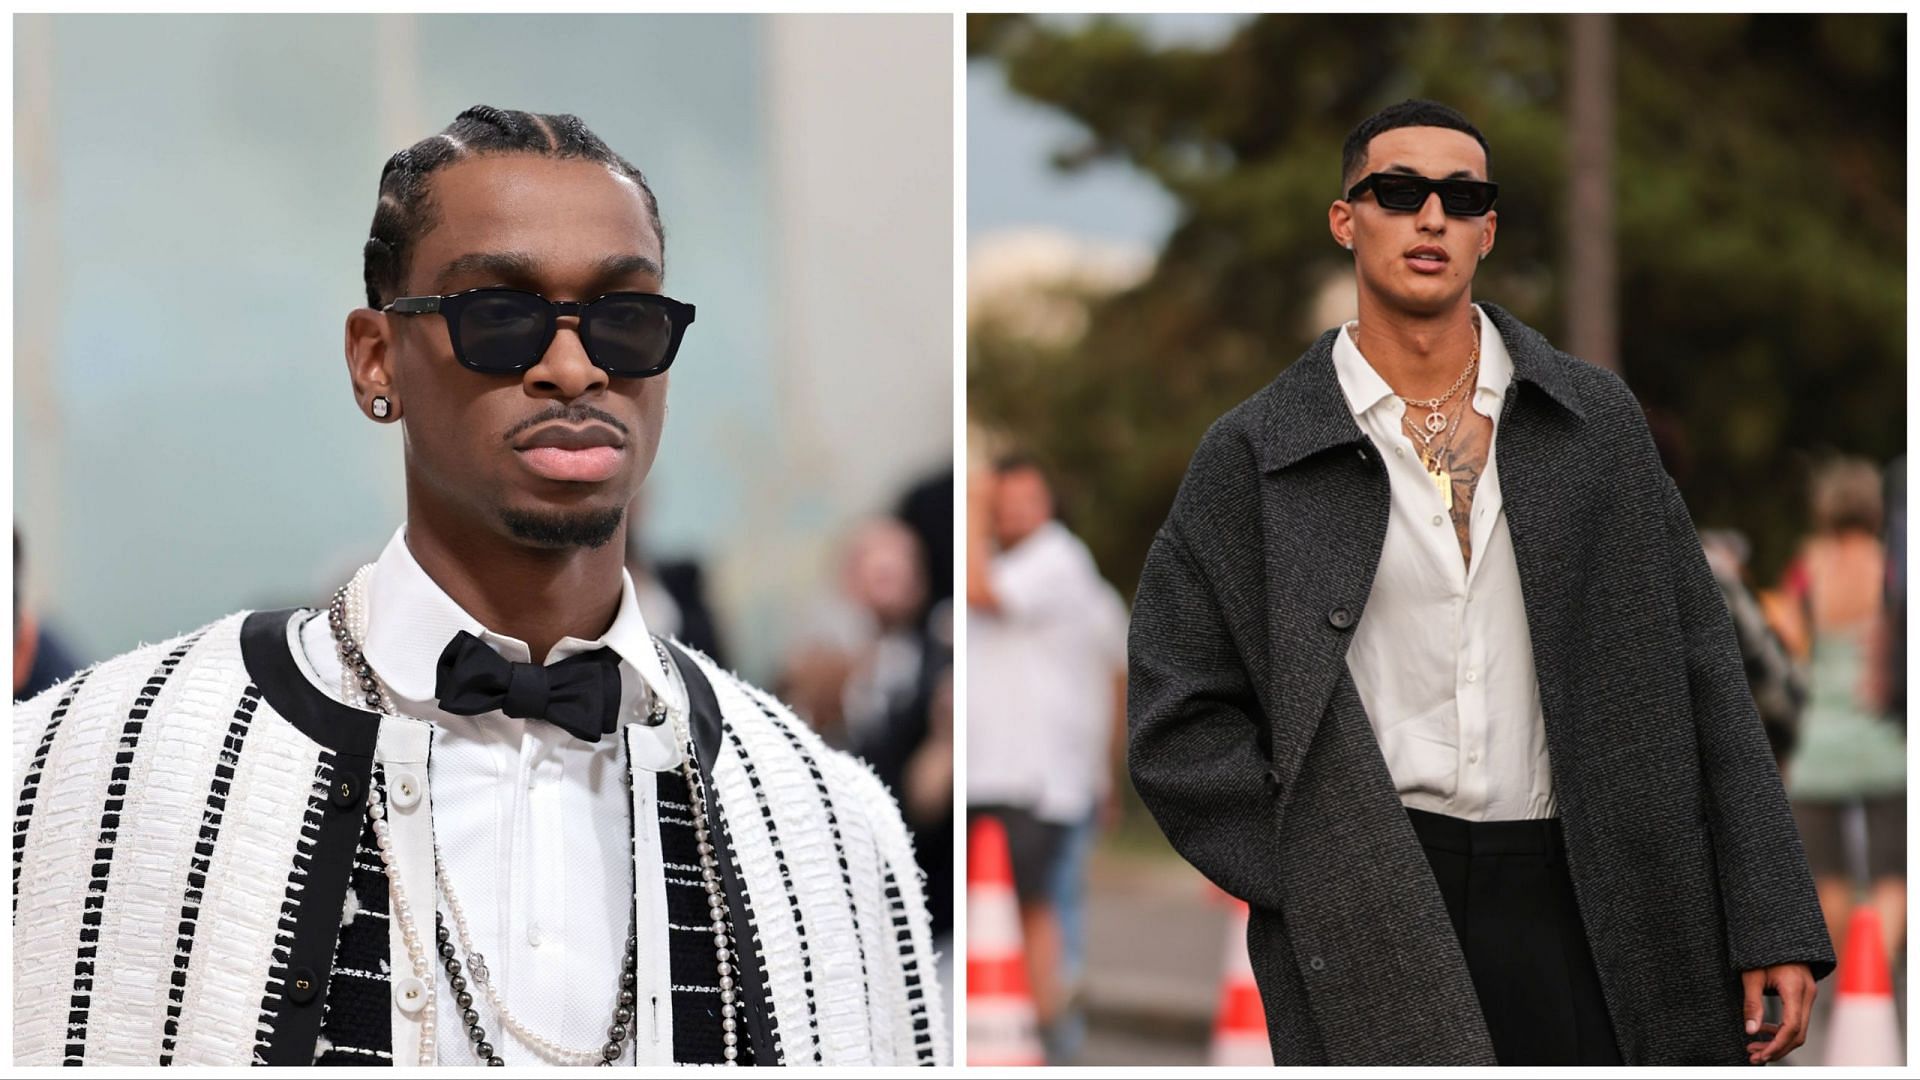 Shai Gilgeous-Alexander (left) and NBA champion Kyle Kuzma (right) are among the most stylish NBA players and steal the spotlight with their respective outfits